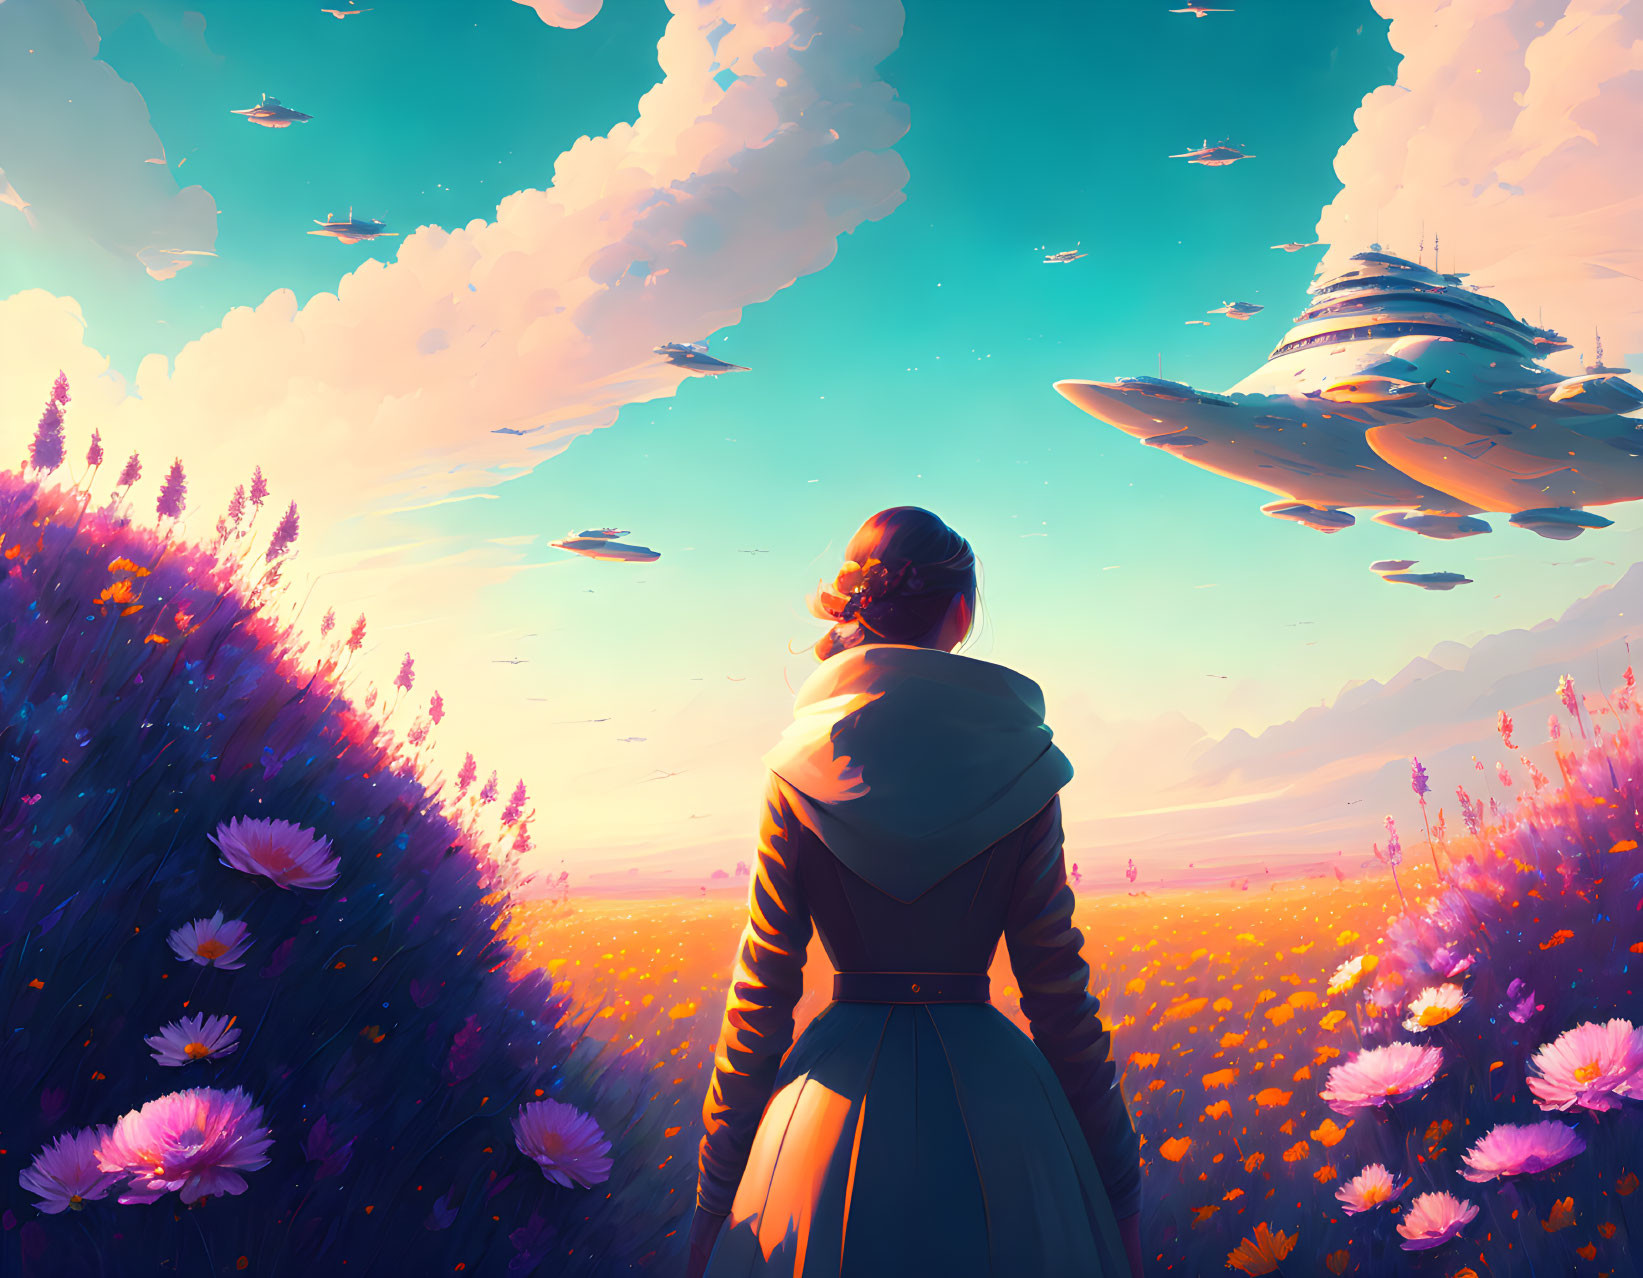 Person in Vibrant Flower Field with Clouds and Flying Ships at Sunset